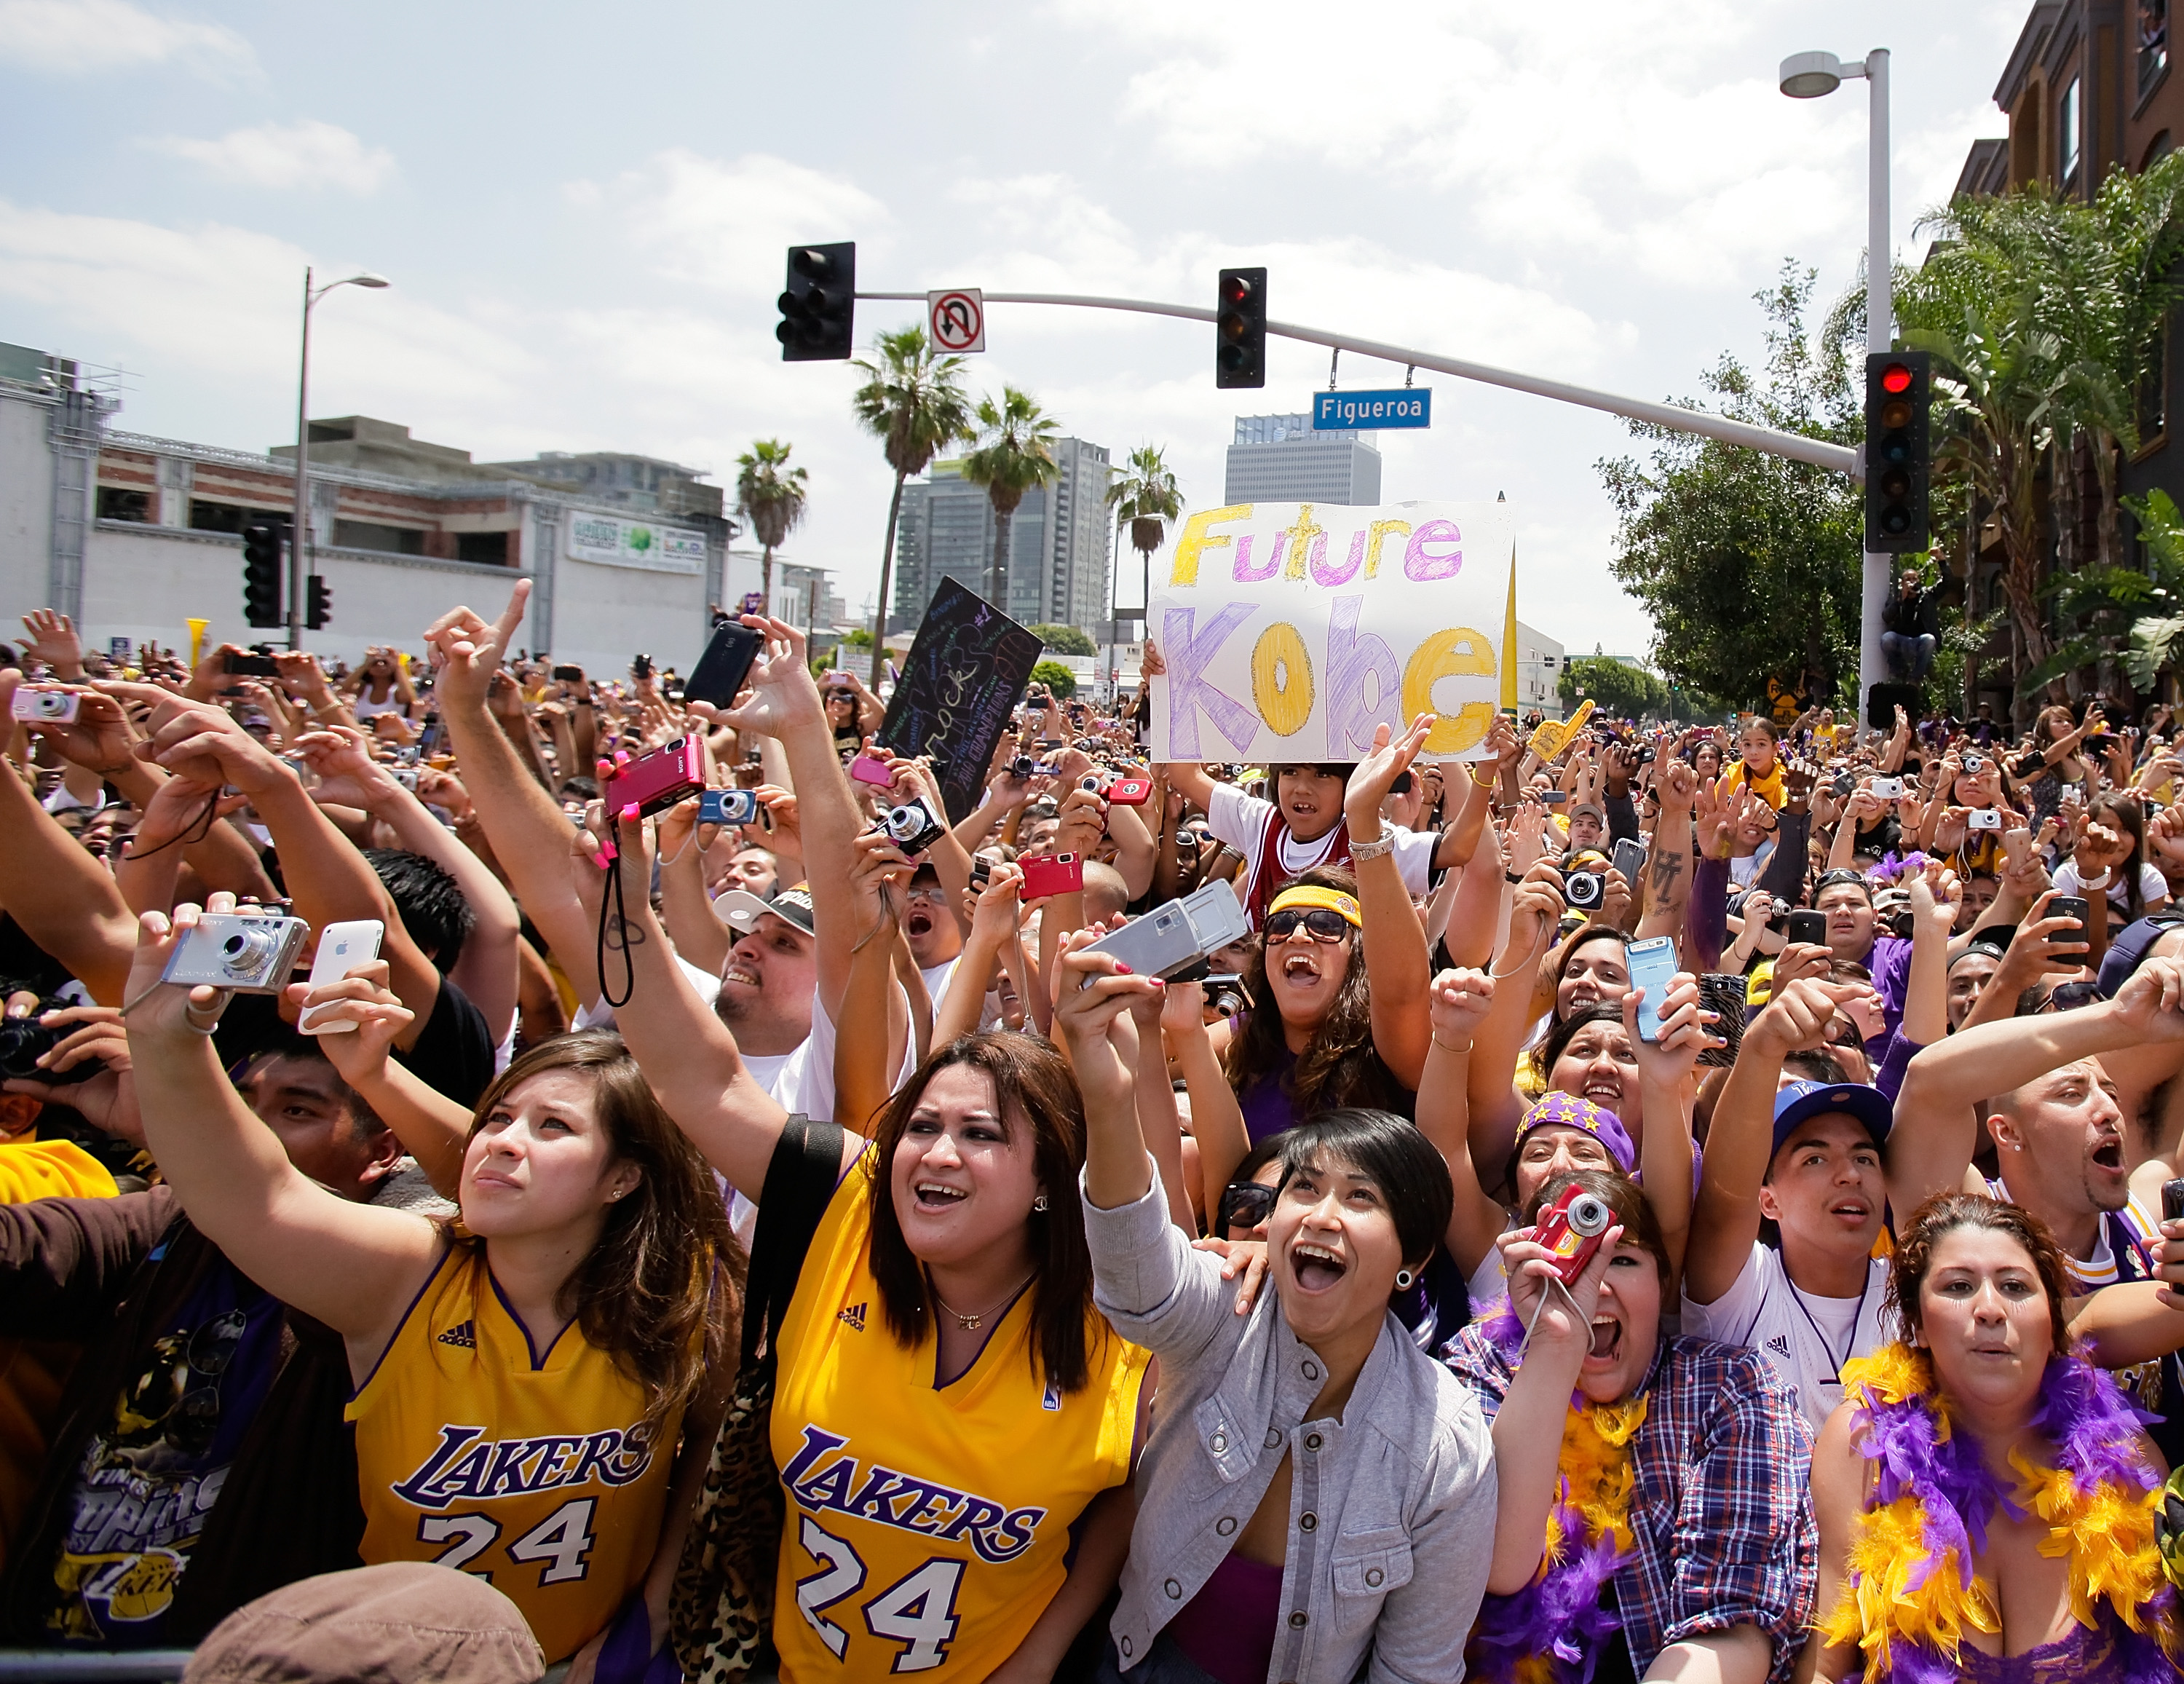 LOS ANGELES, CA - JUNE 21:  Fans cheer for the Los Angeles Lakers during their victory parade for the the NBA basketball champion team on June 21, 2010 in Los Angeles, California. The Lakers beat the Boston Celtics 87-79 in 7 games for the franchise's 16 